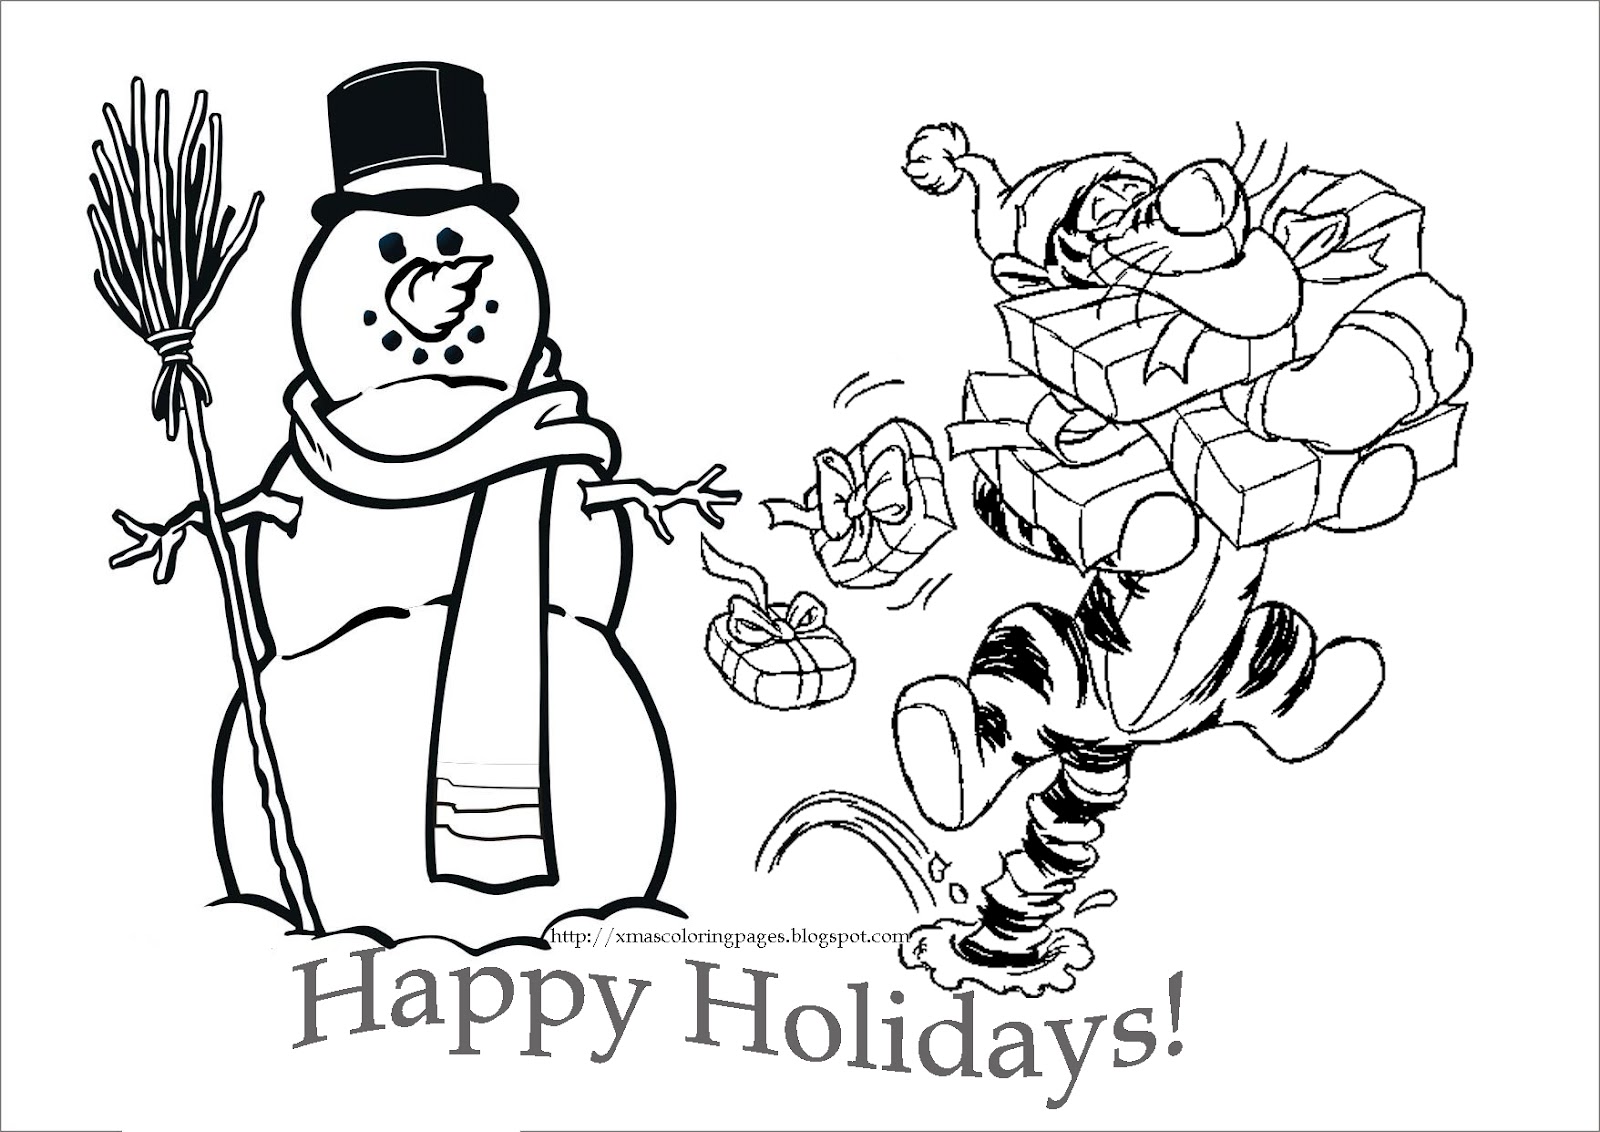 Turkey coloring pages - Free 37+ Disney Kleurplaten Coloring Pages